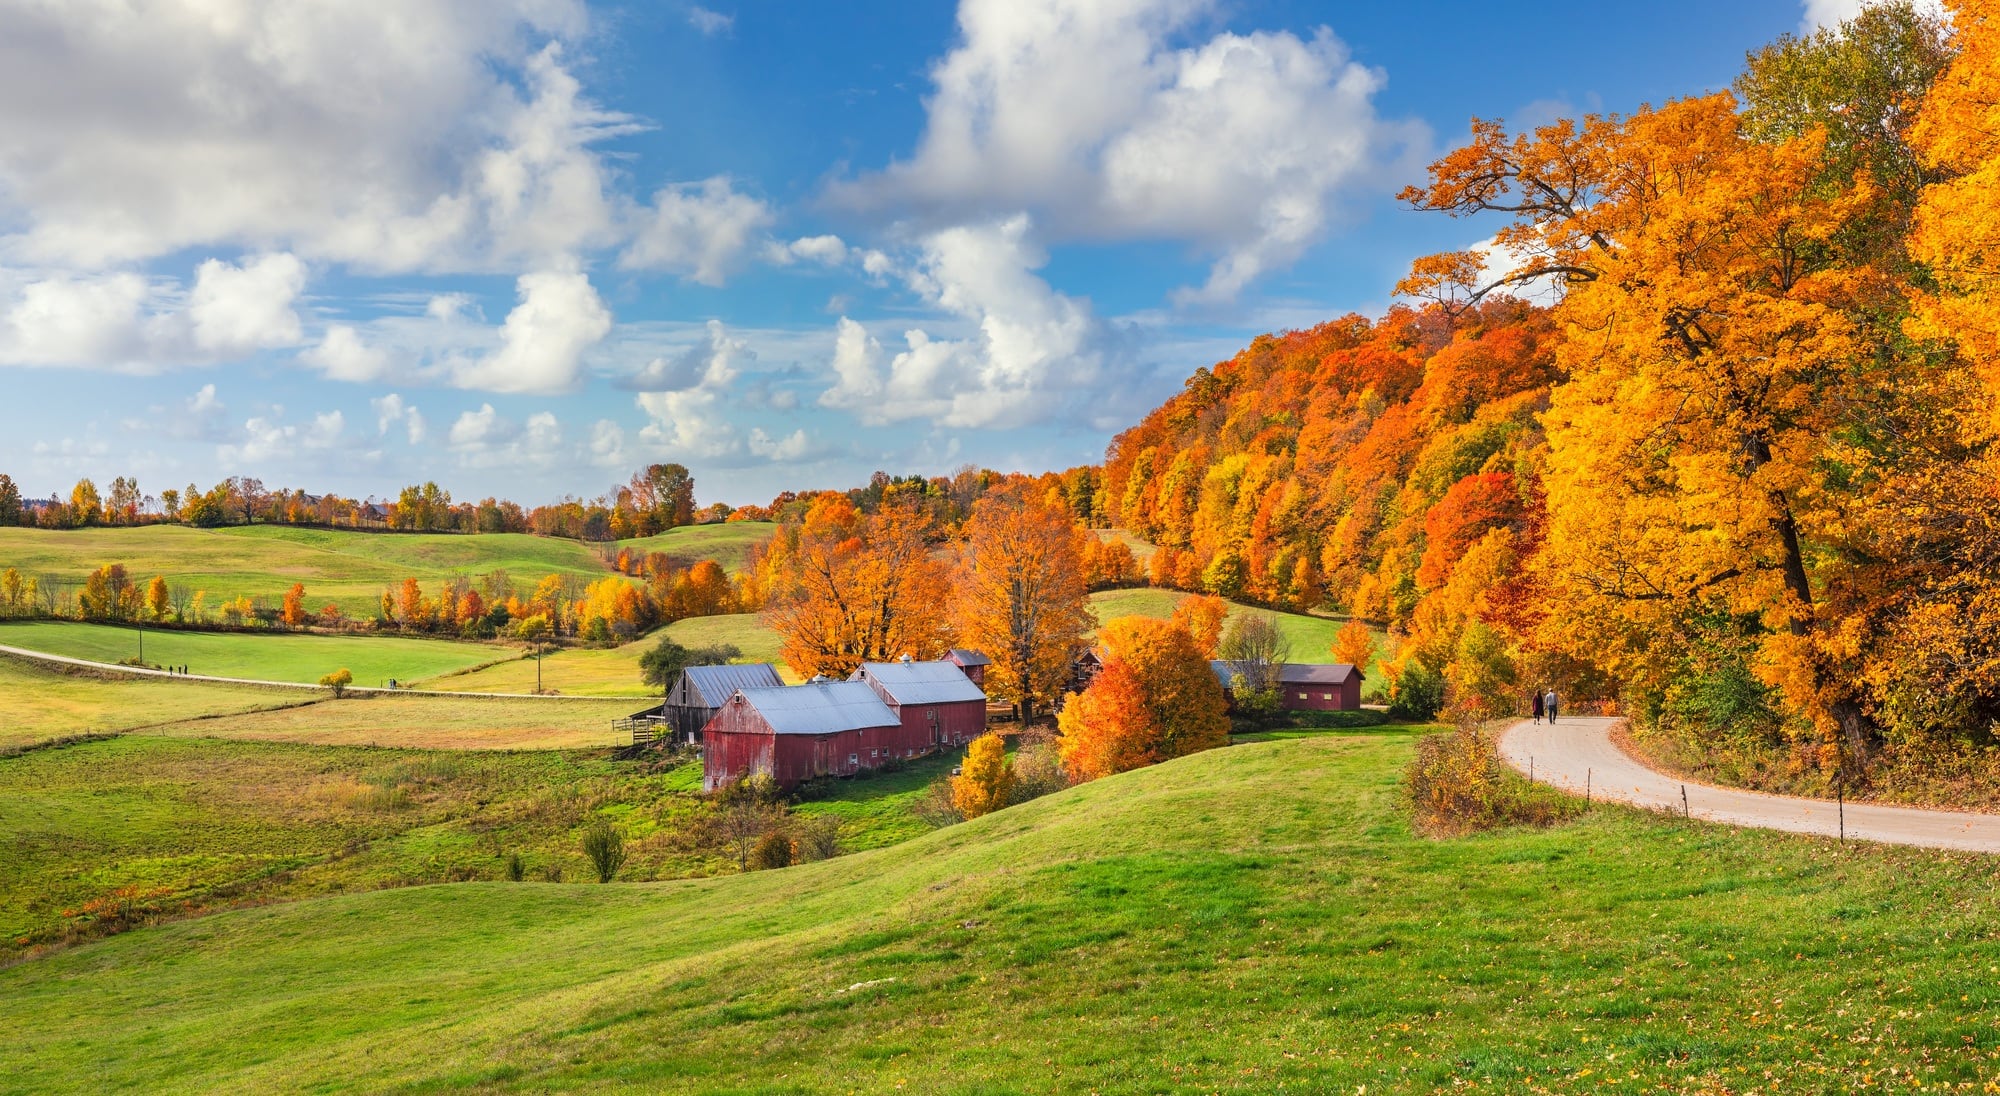 Plan your Vermont Fall Foliage road trip with our guide on where see the best fall colors including scenic leaf-peeping drives and more.